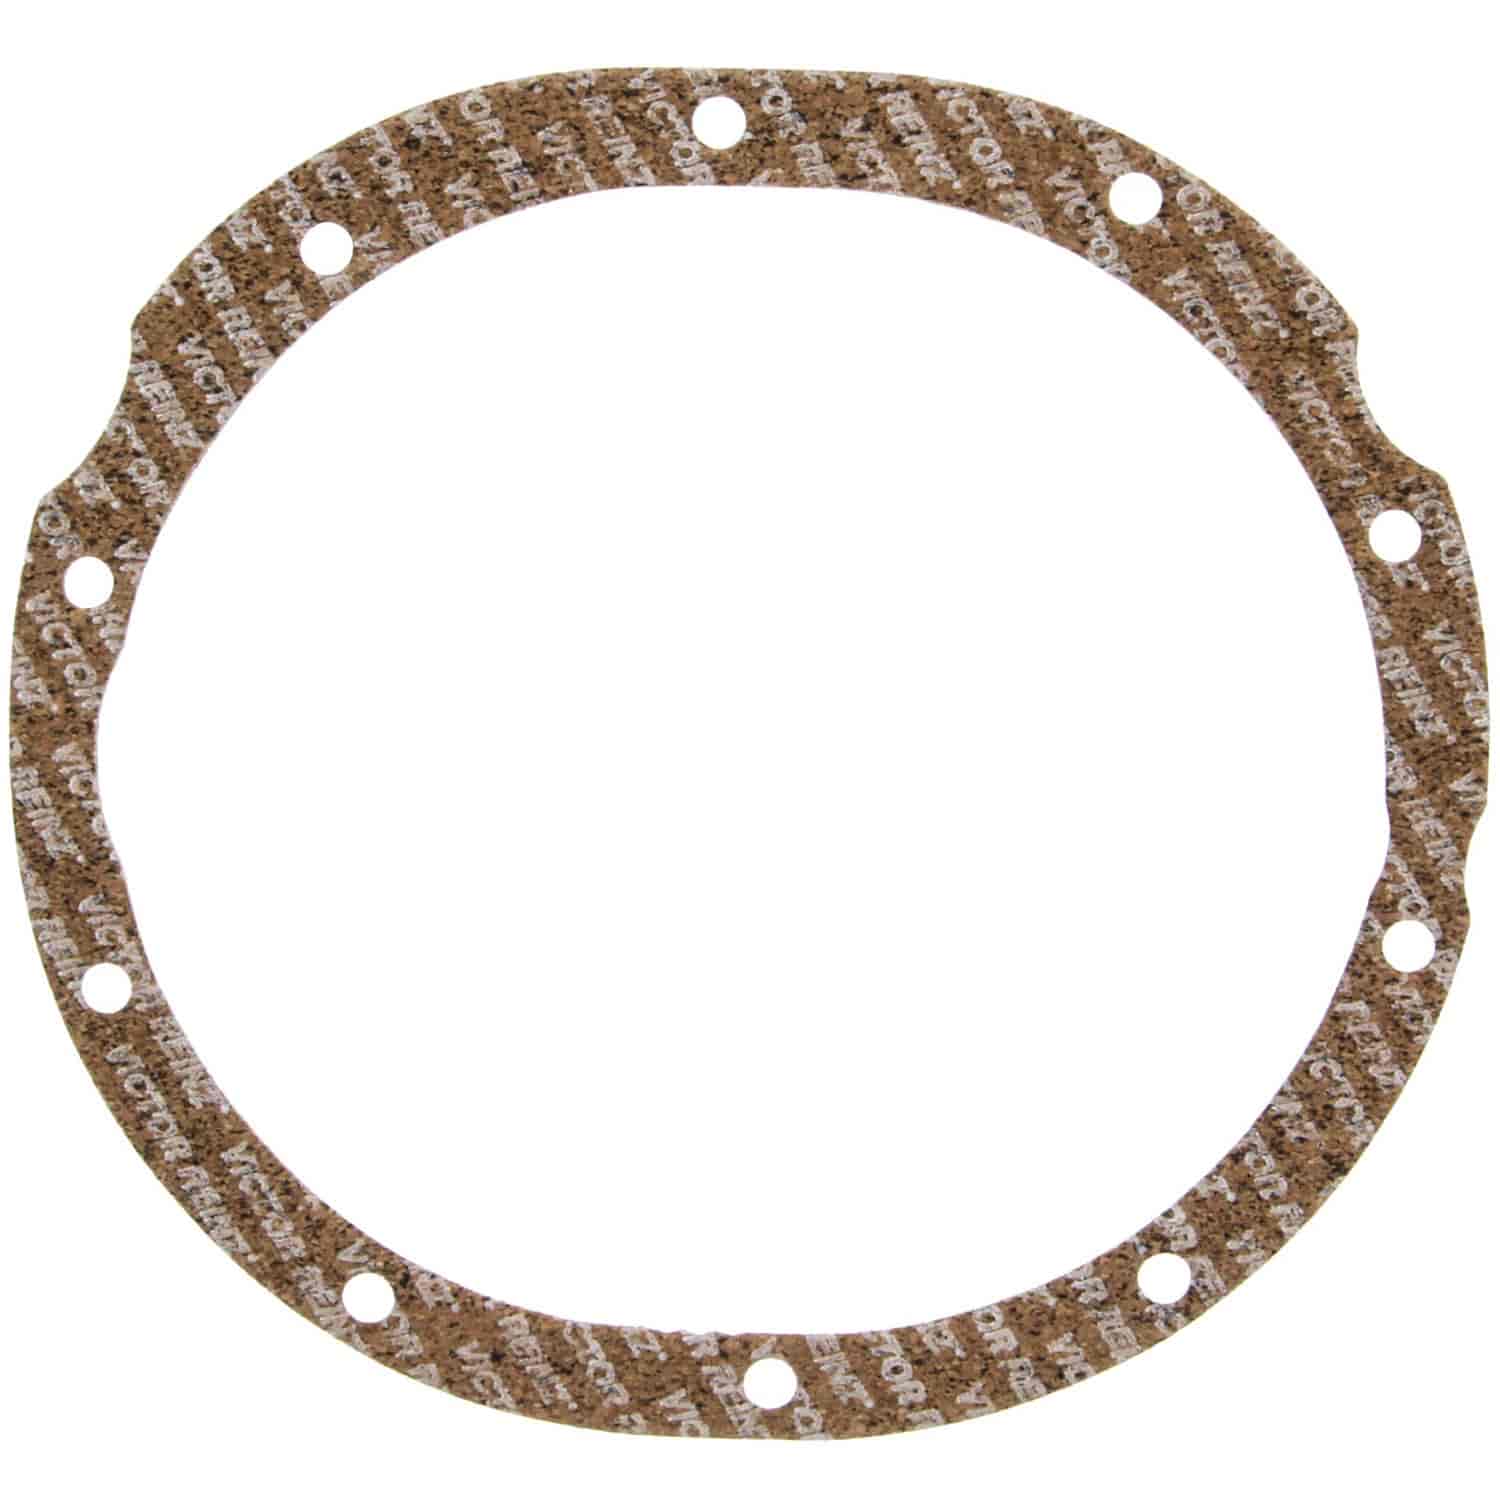 Differential Carrier Gasket Bui Chev GMC Olds Pont F85 64-72